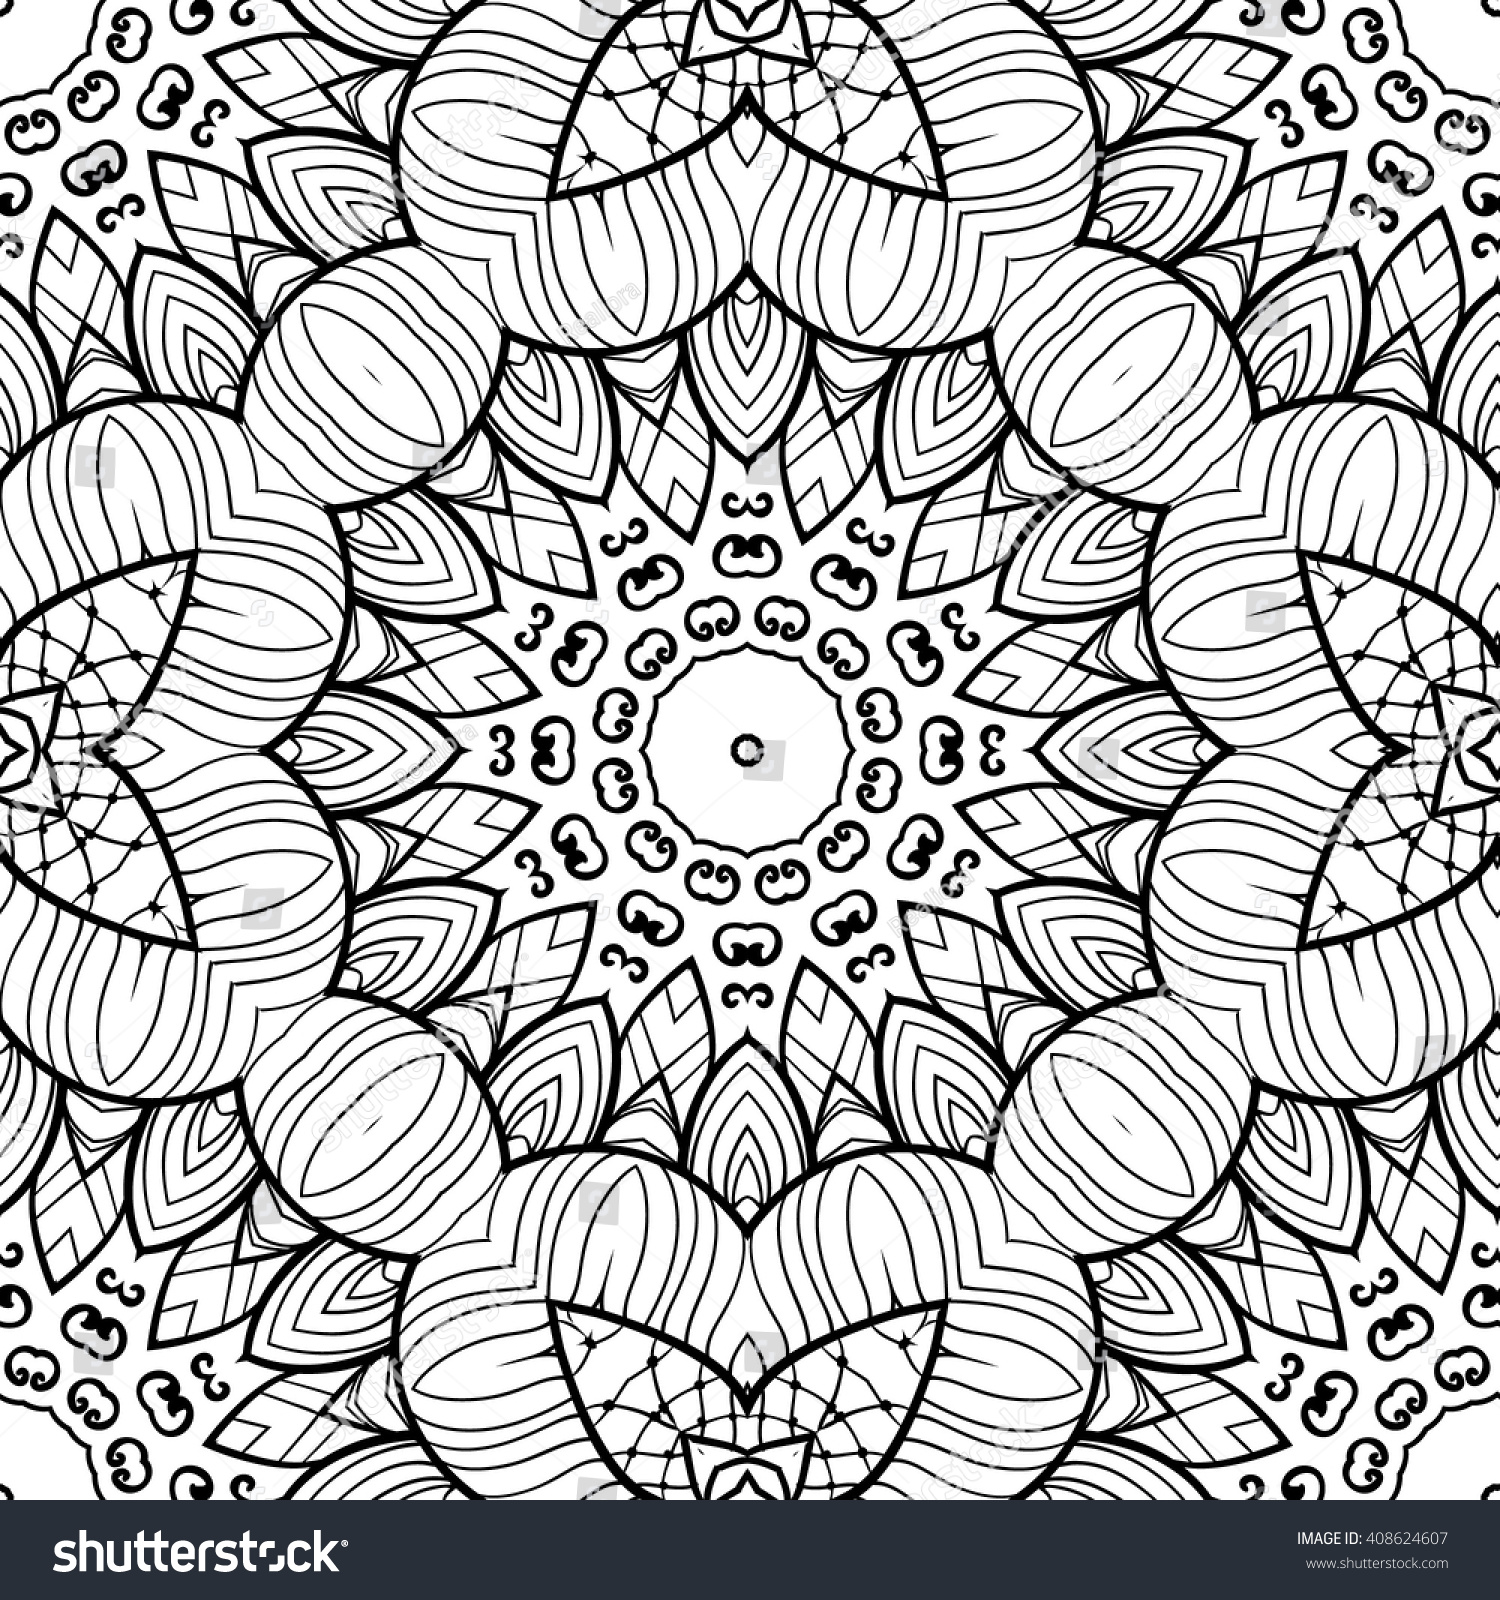 Adult Coloring Page Seamless Zendoodle Vector Stock Vector 408624607 ...